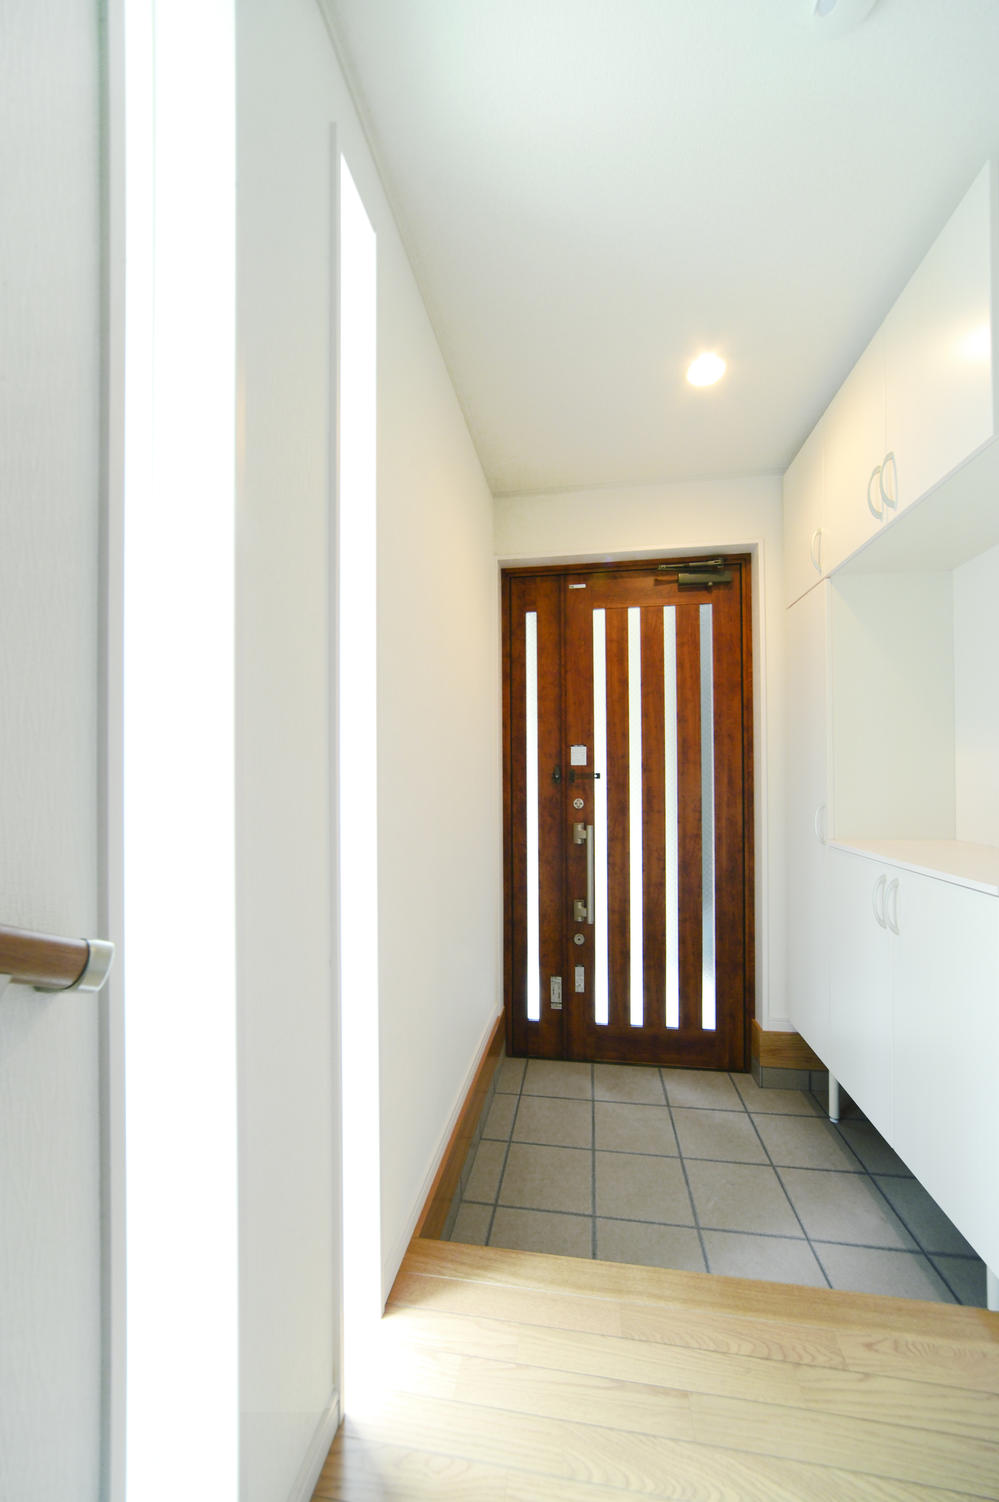 Same specifications photos (Other introspection). Our construction [Entrance hall]